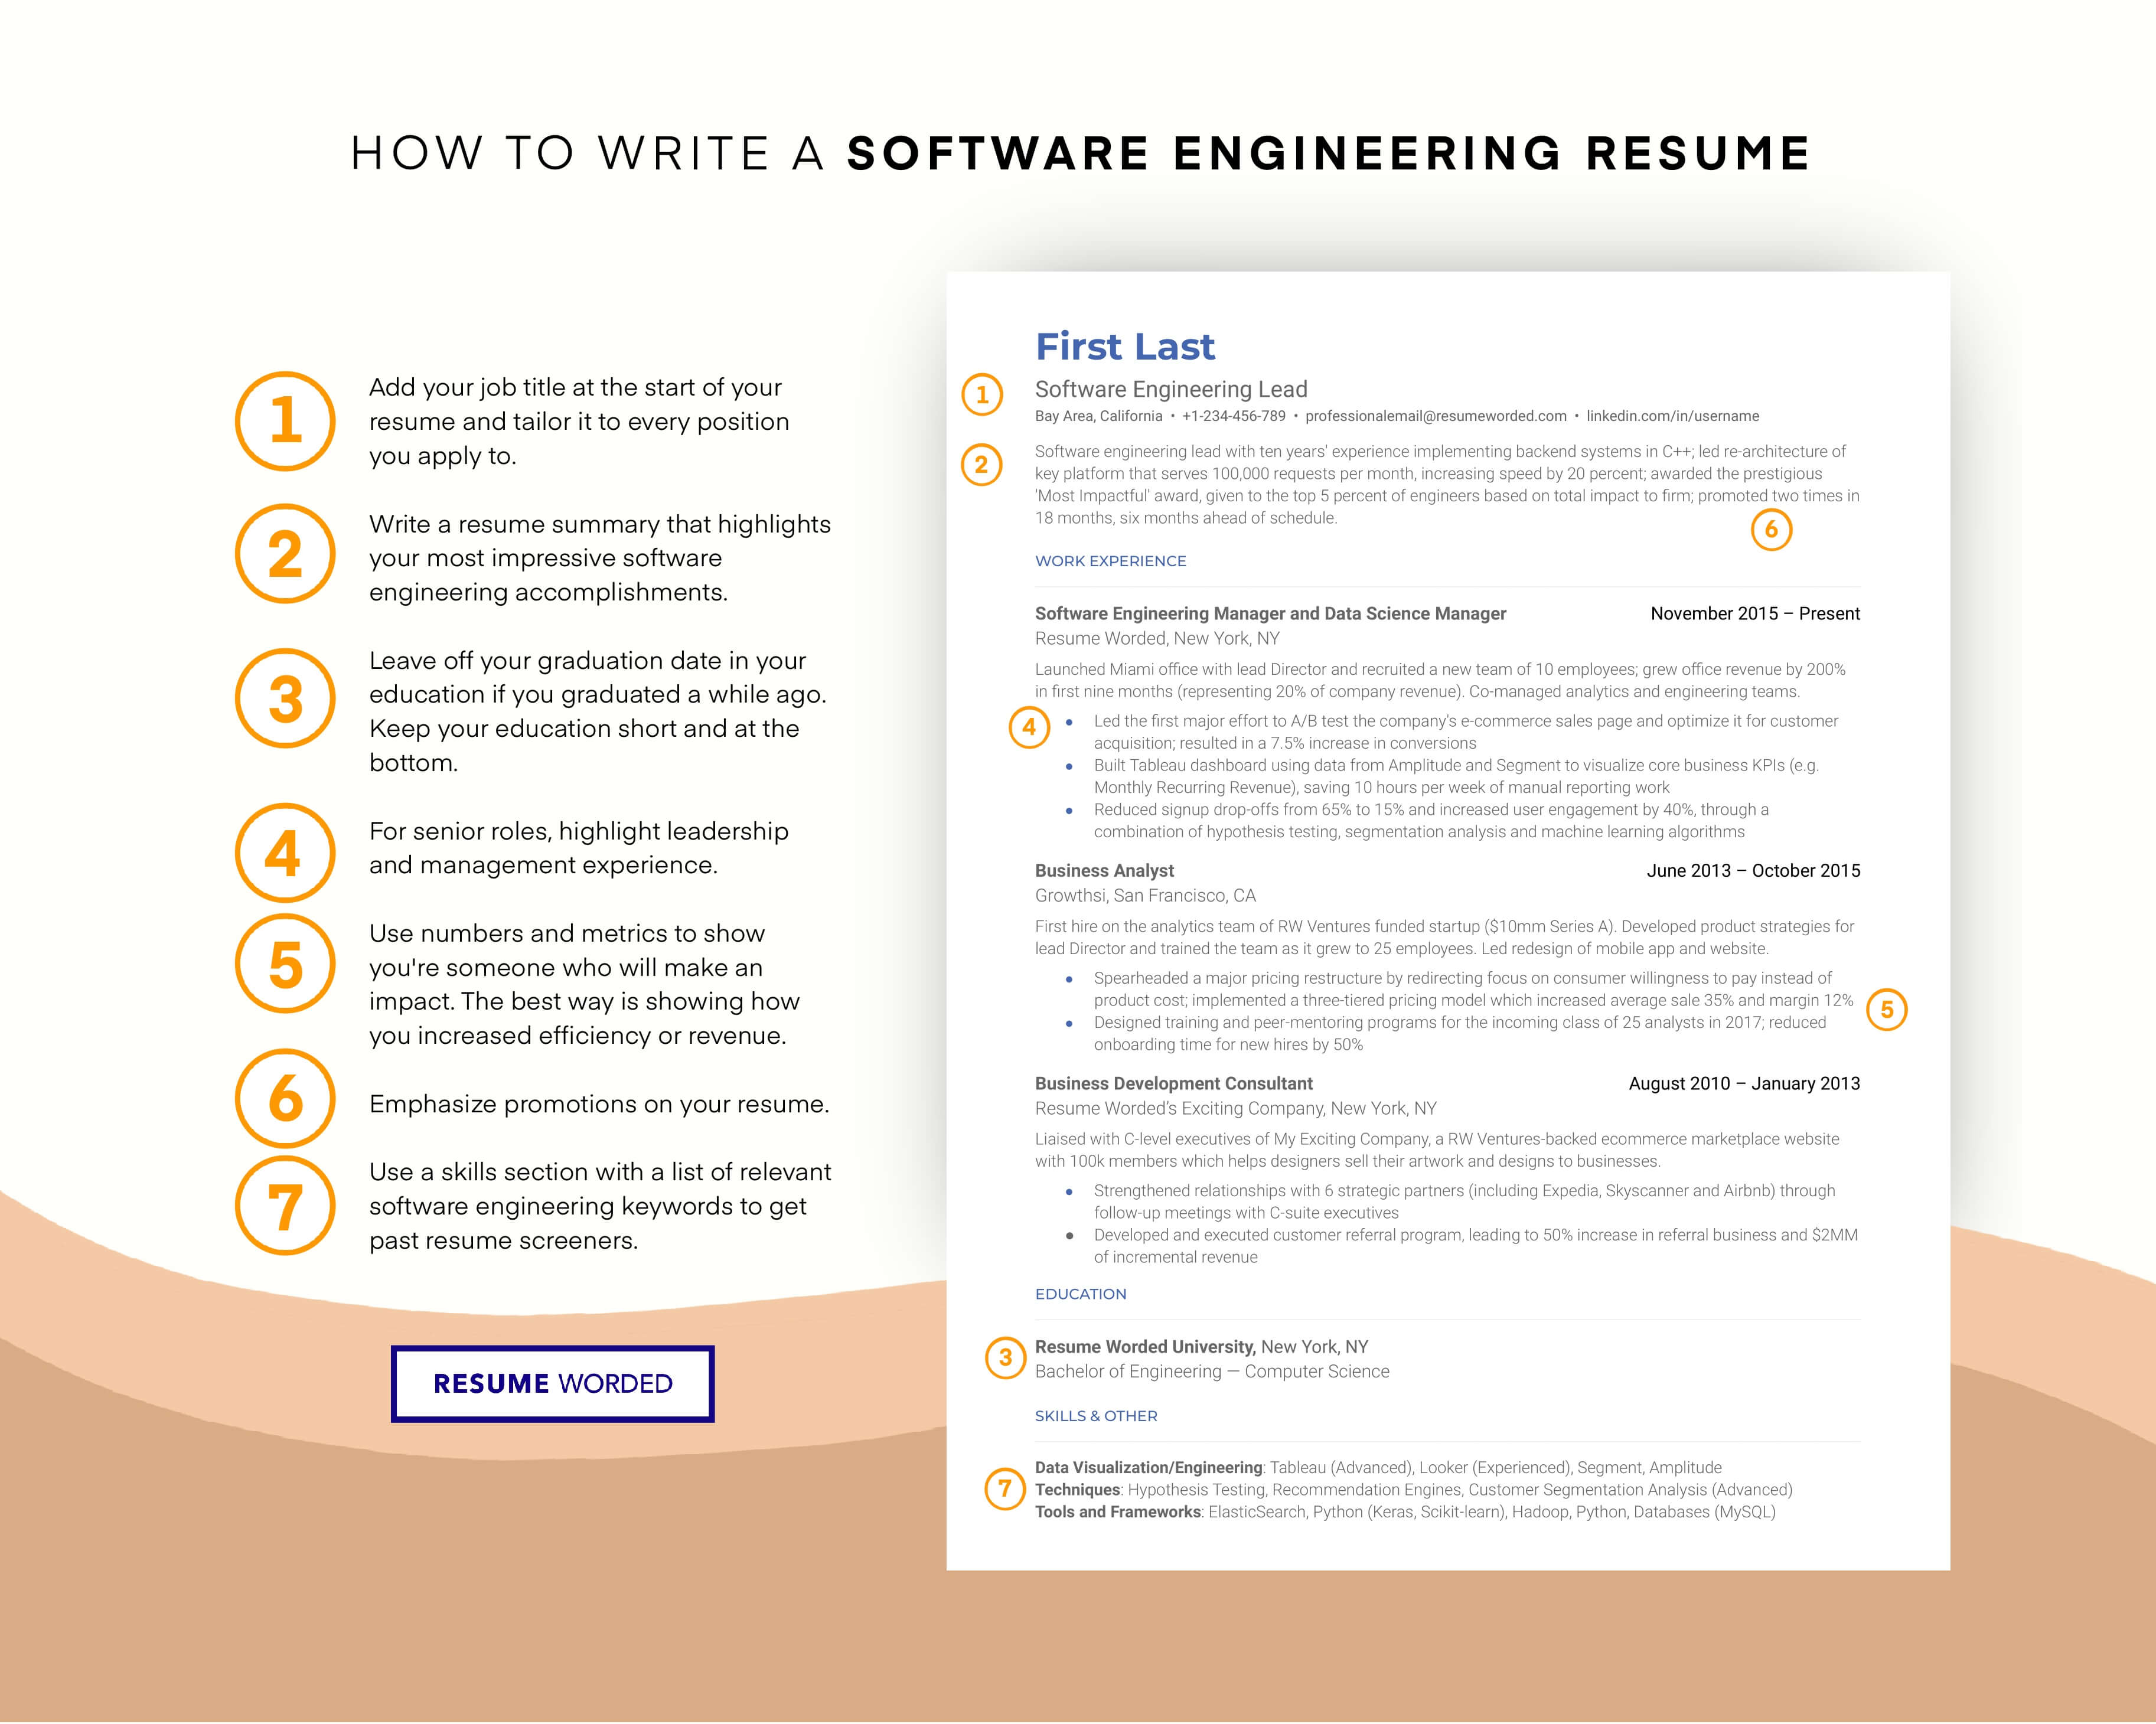 List programs of software that you have experience using. - E-Procurement Manager Resume